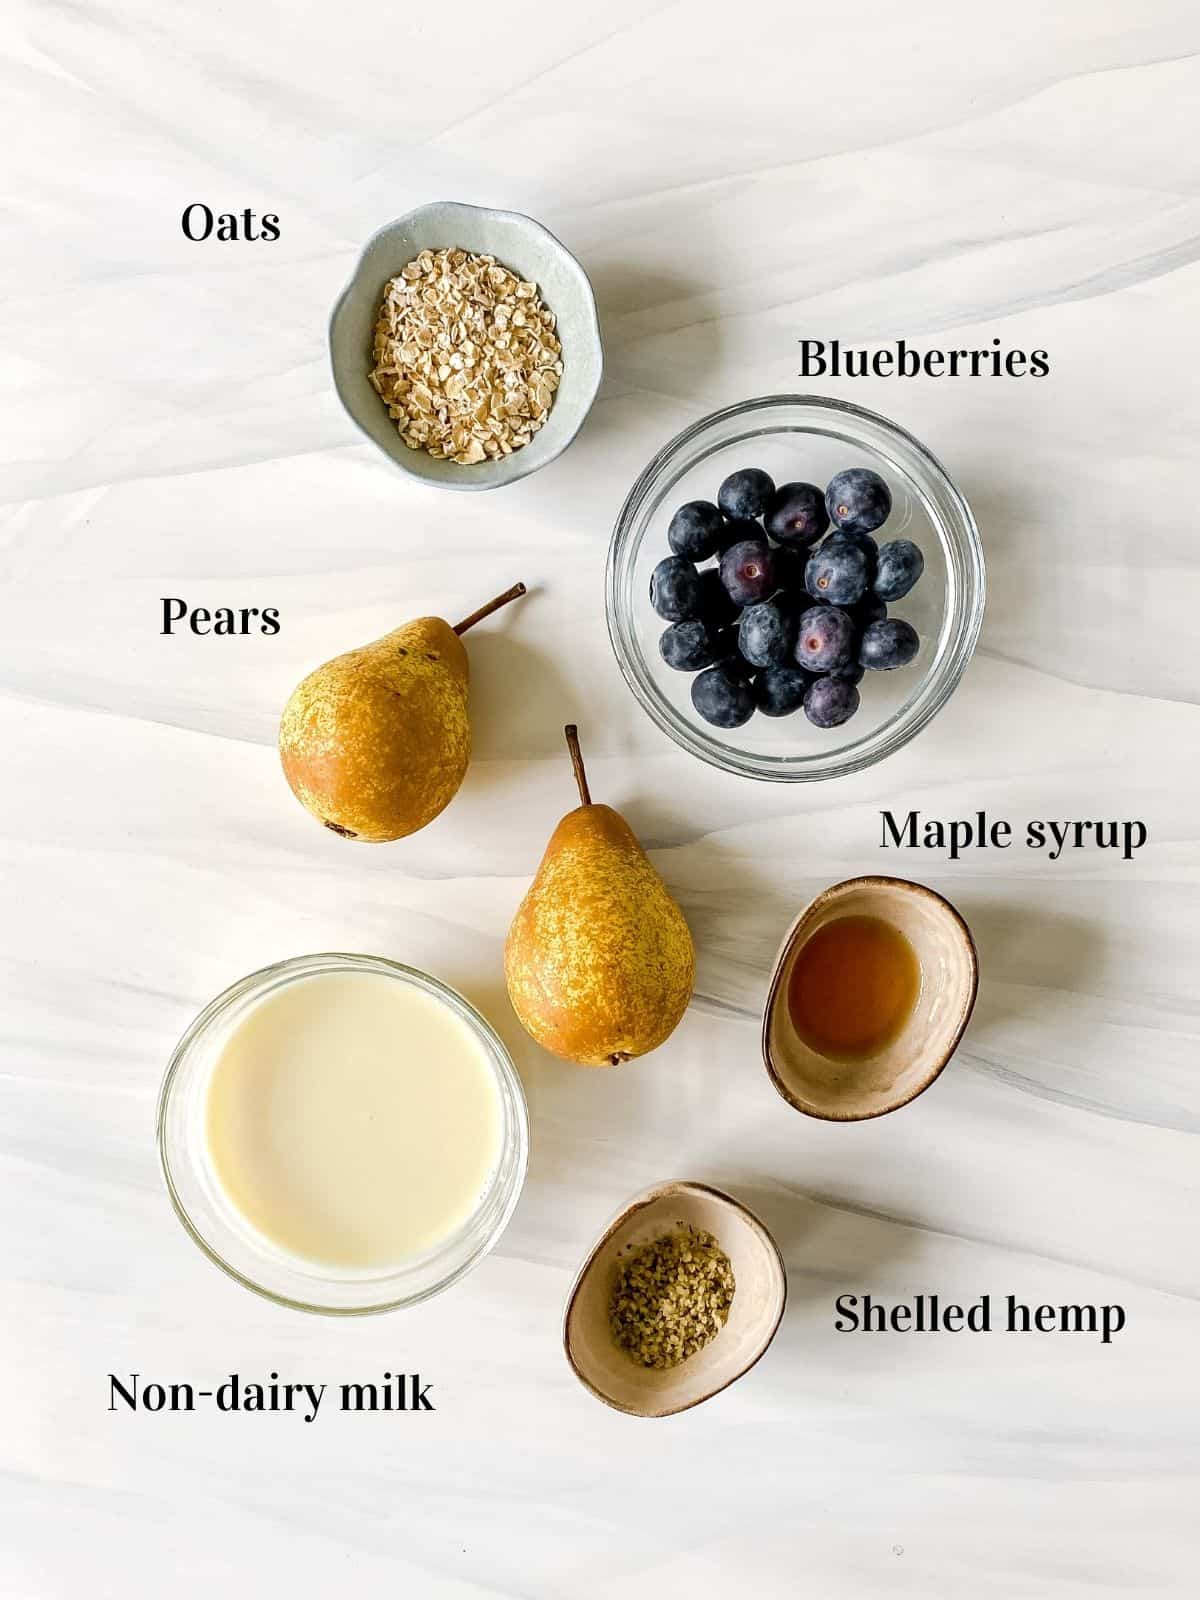 pears next to bowls of non-dairy milk, oats, maple syrup, shelled hemp and blueberries.